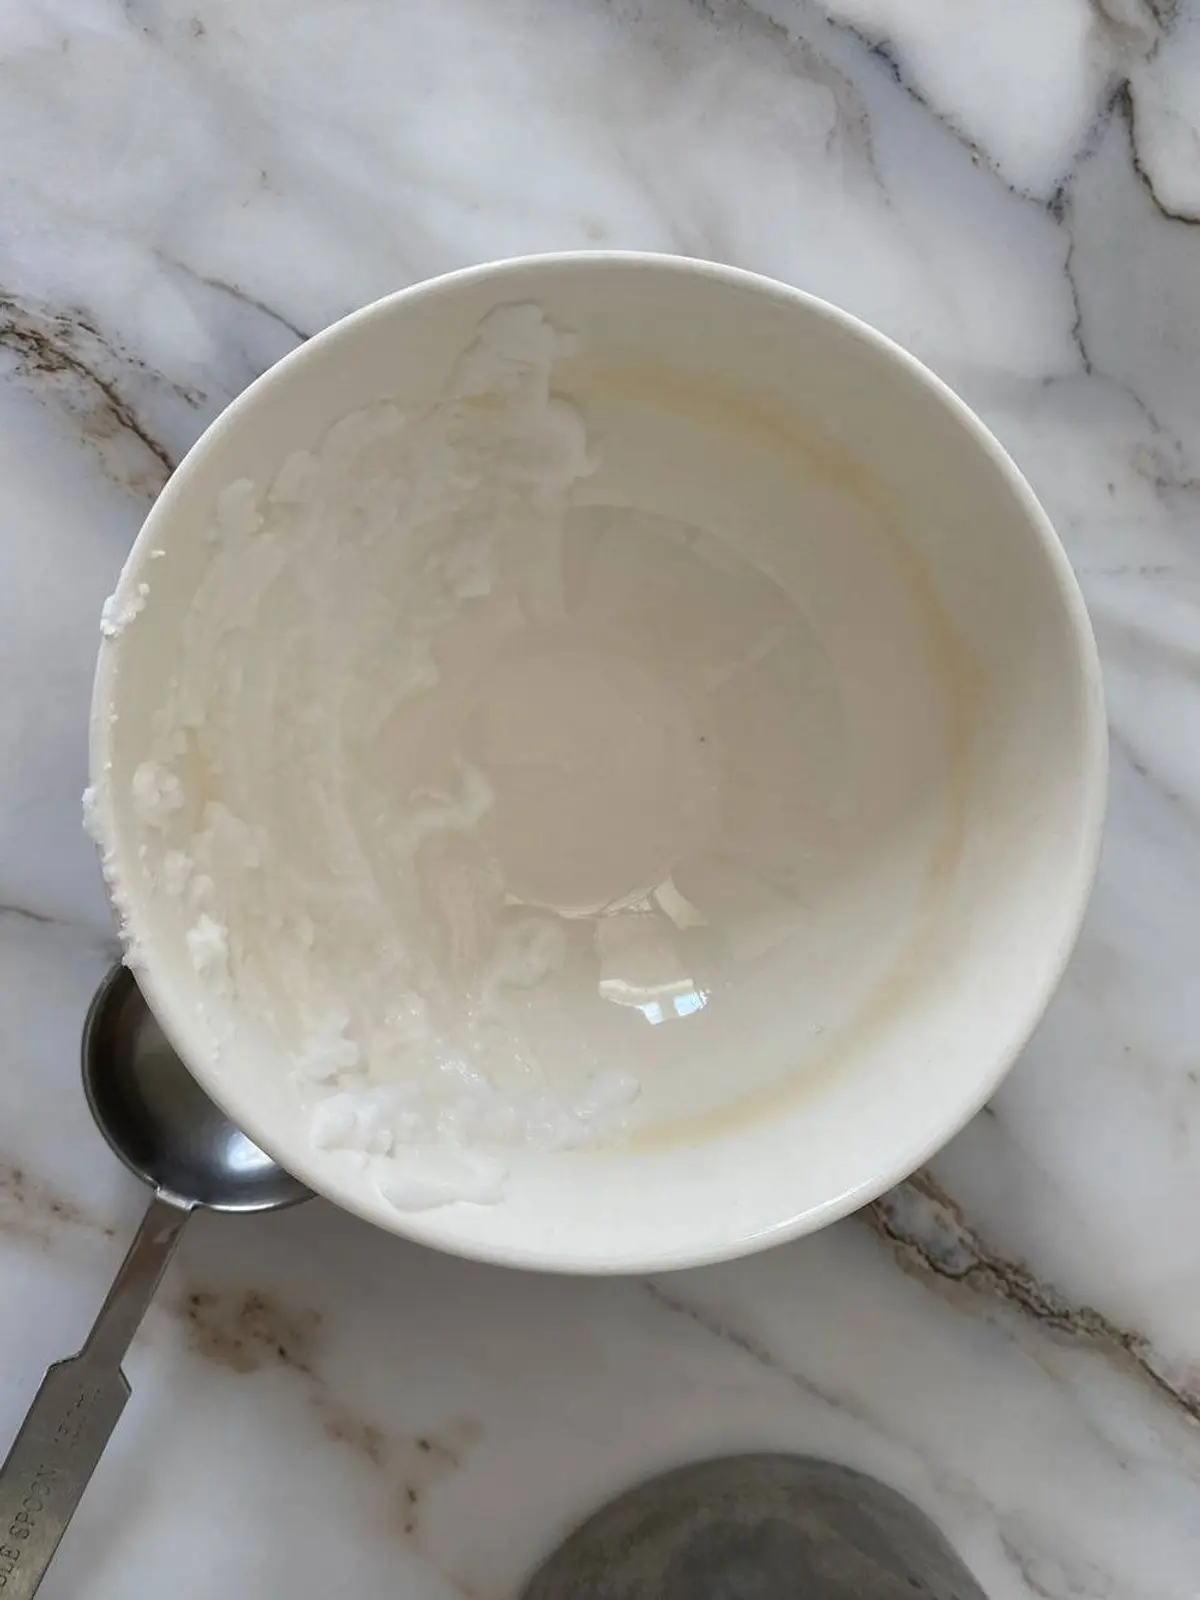 Cleaning Stain on Ceramic with Baking Soda and Vinegar